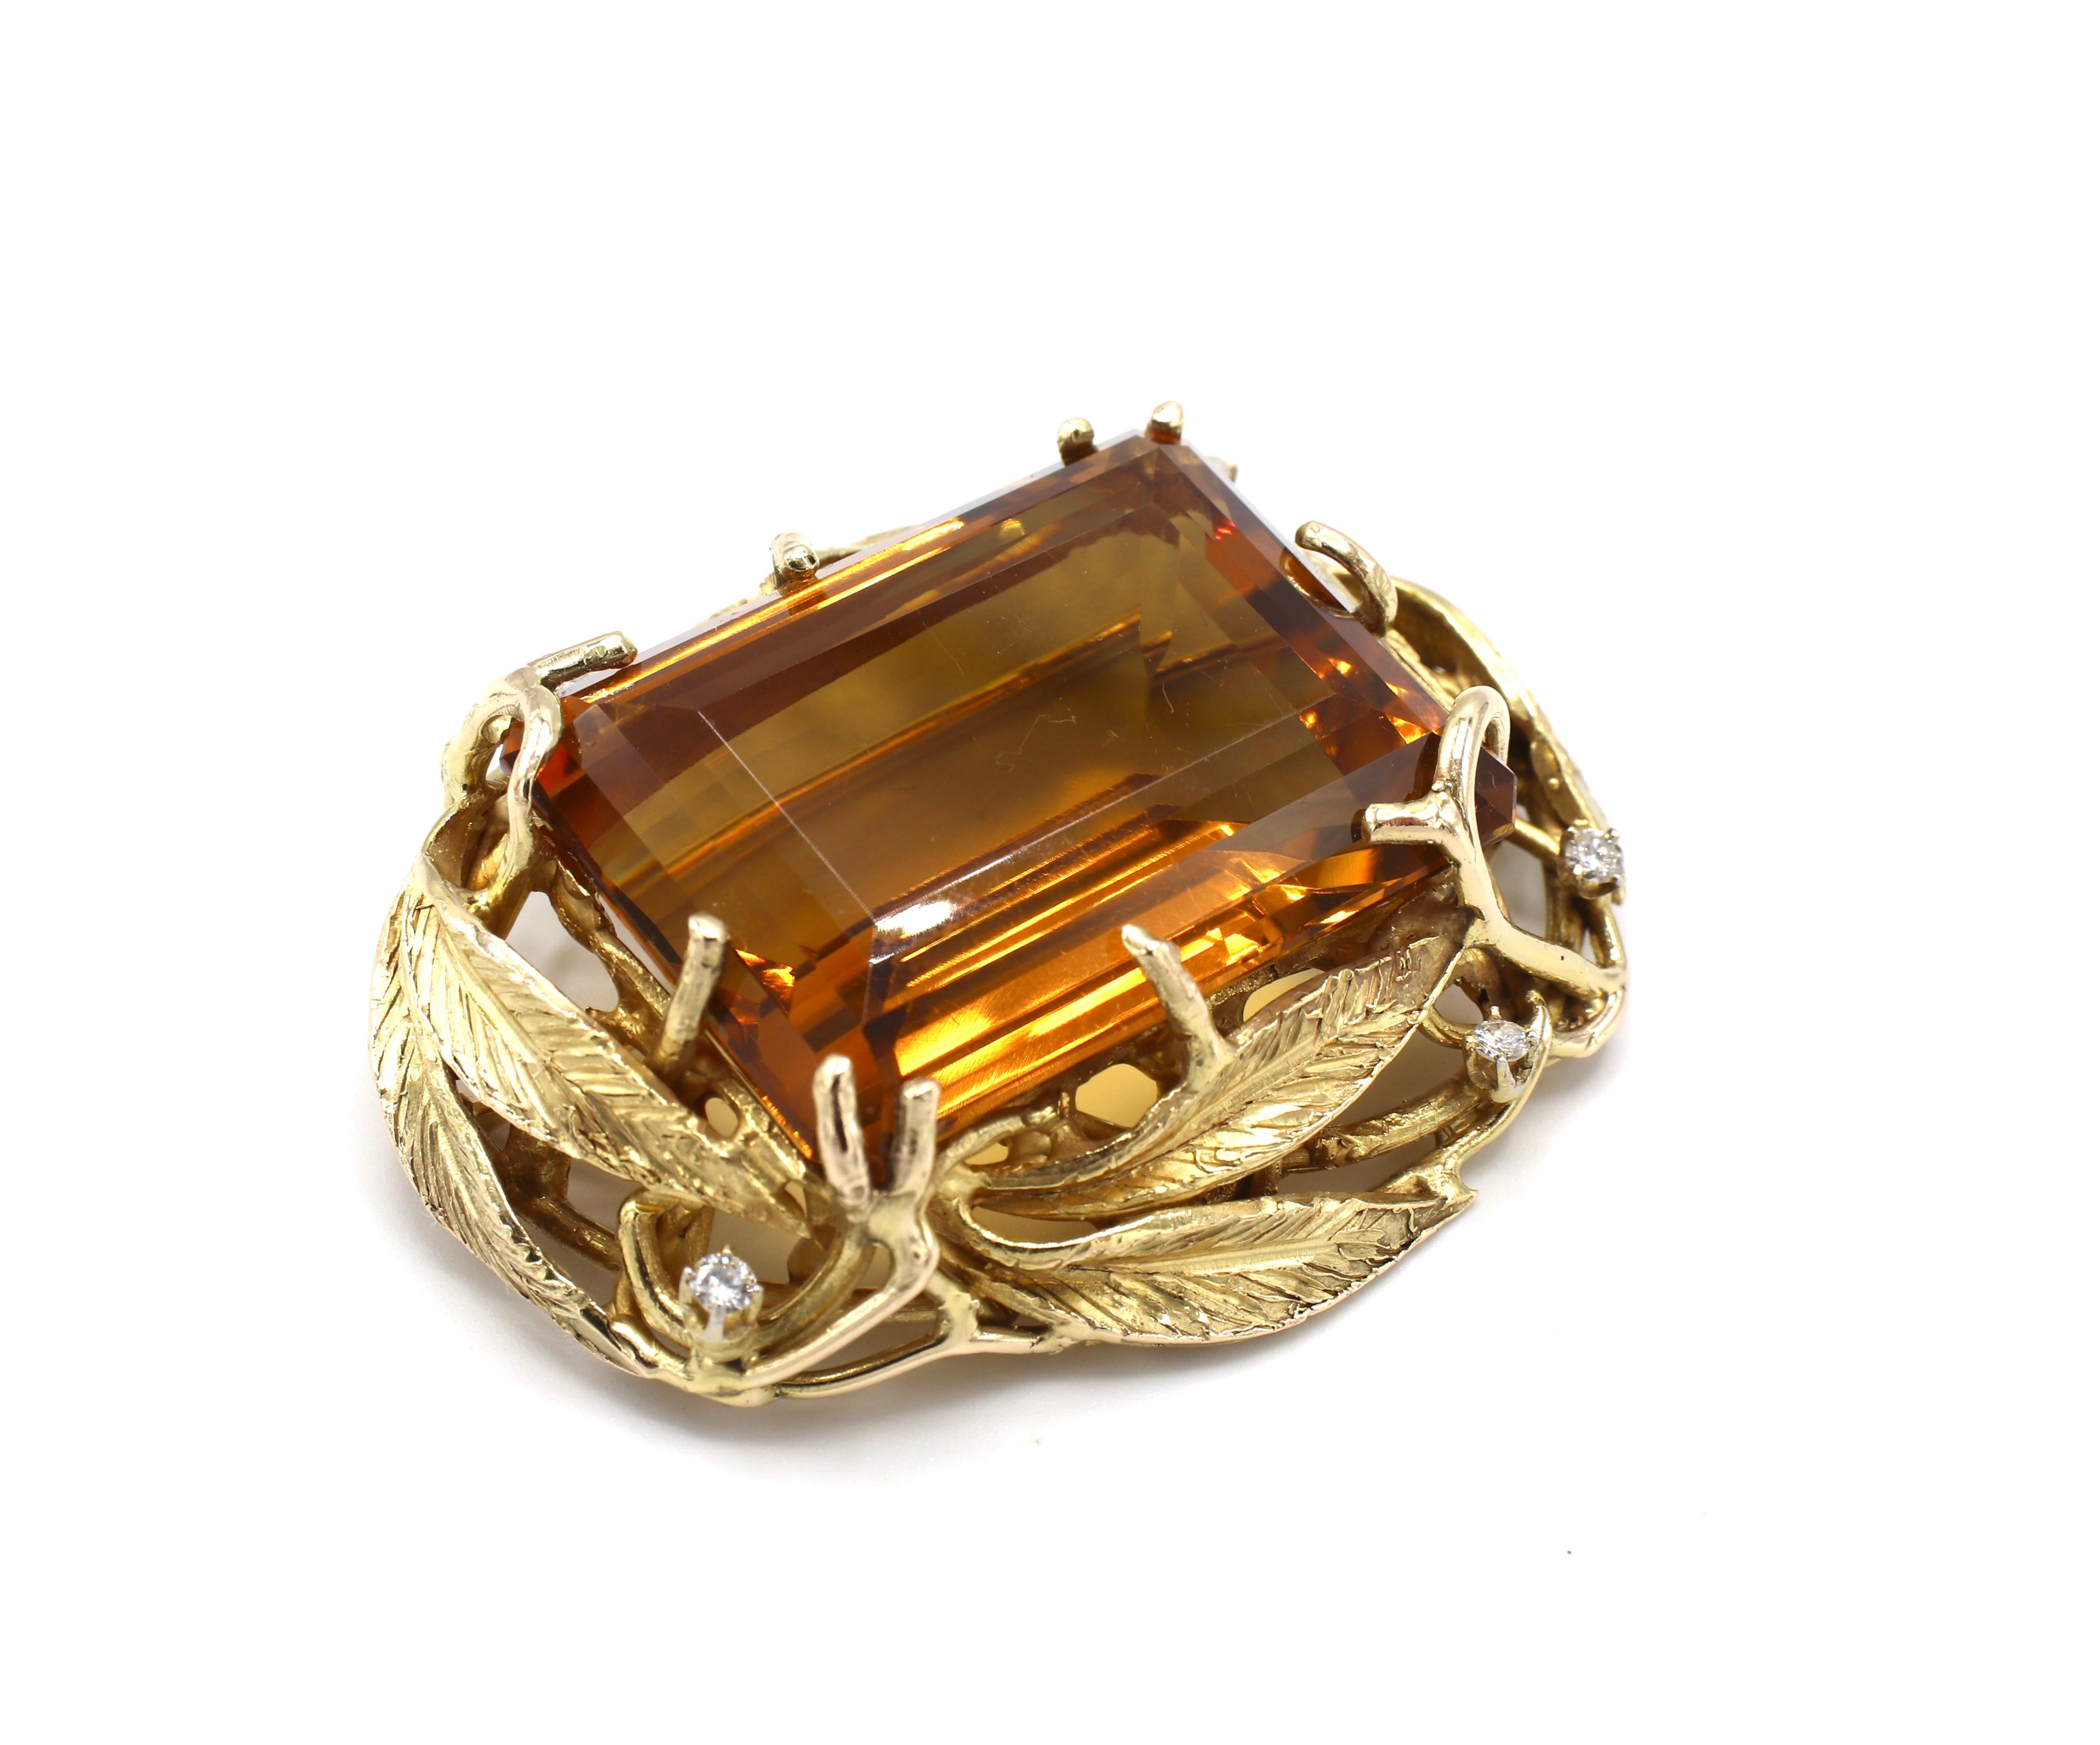 Large 14K Yellow Gold Citrine & Diamond Pin Brooch

Metal: 14k yellow gold
Weight: 55 grams
Citrine: 35 x 26 x 16, approx. 98 carats
Diamonds: 5 round brilliant cut diamonds, approx. 0.40 carats, G-H SI
Pin Length: 55mm
Pin Width: 41mm
Signed: